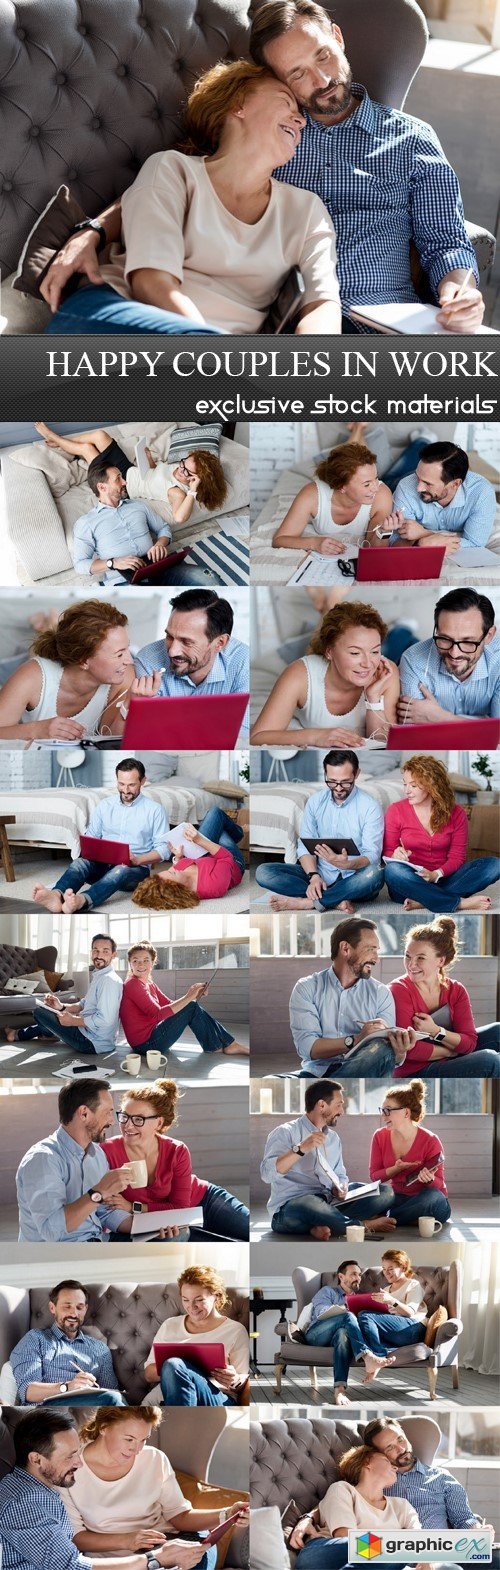 Happy Couples In Work - 15 UHQ JPEG